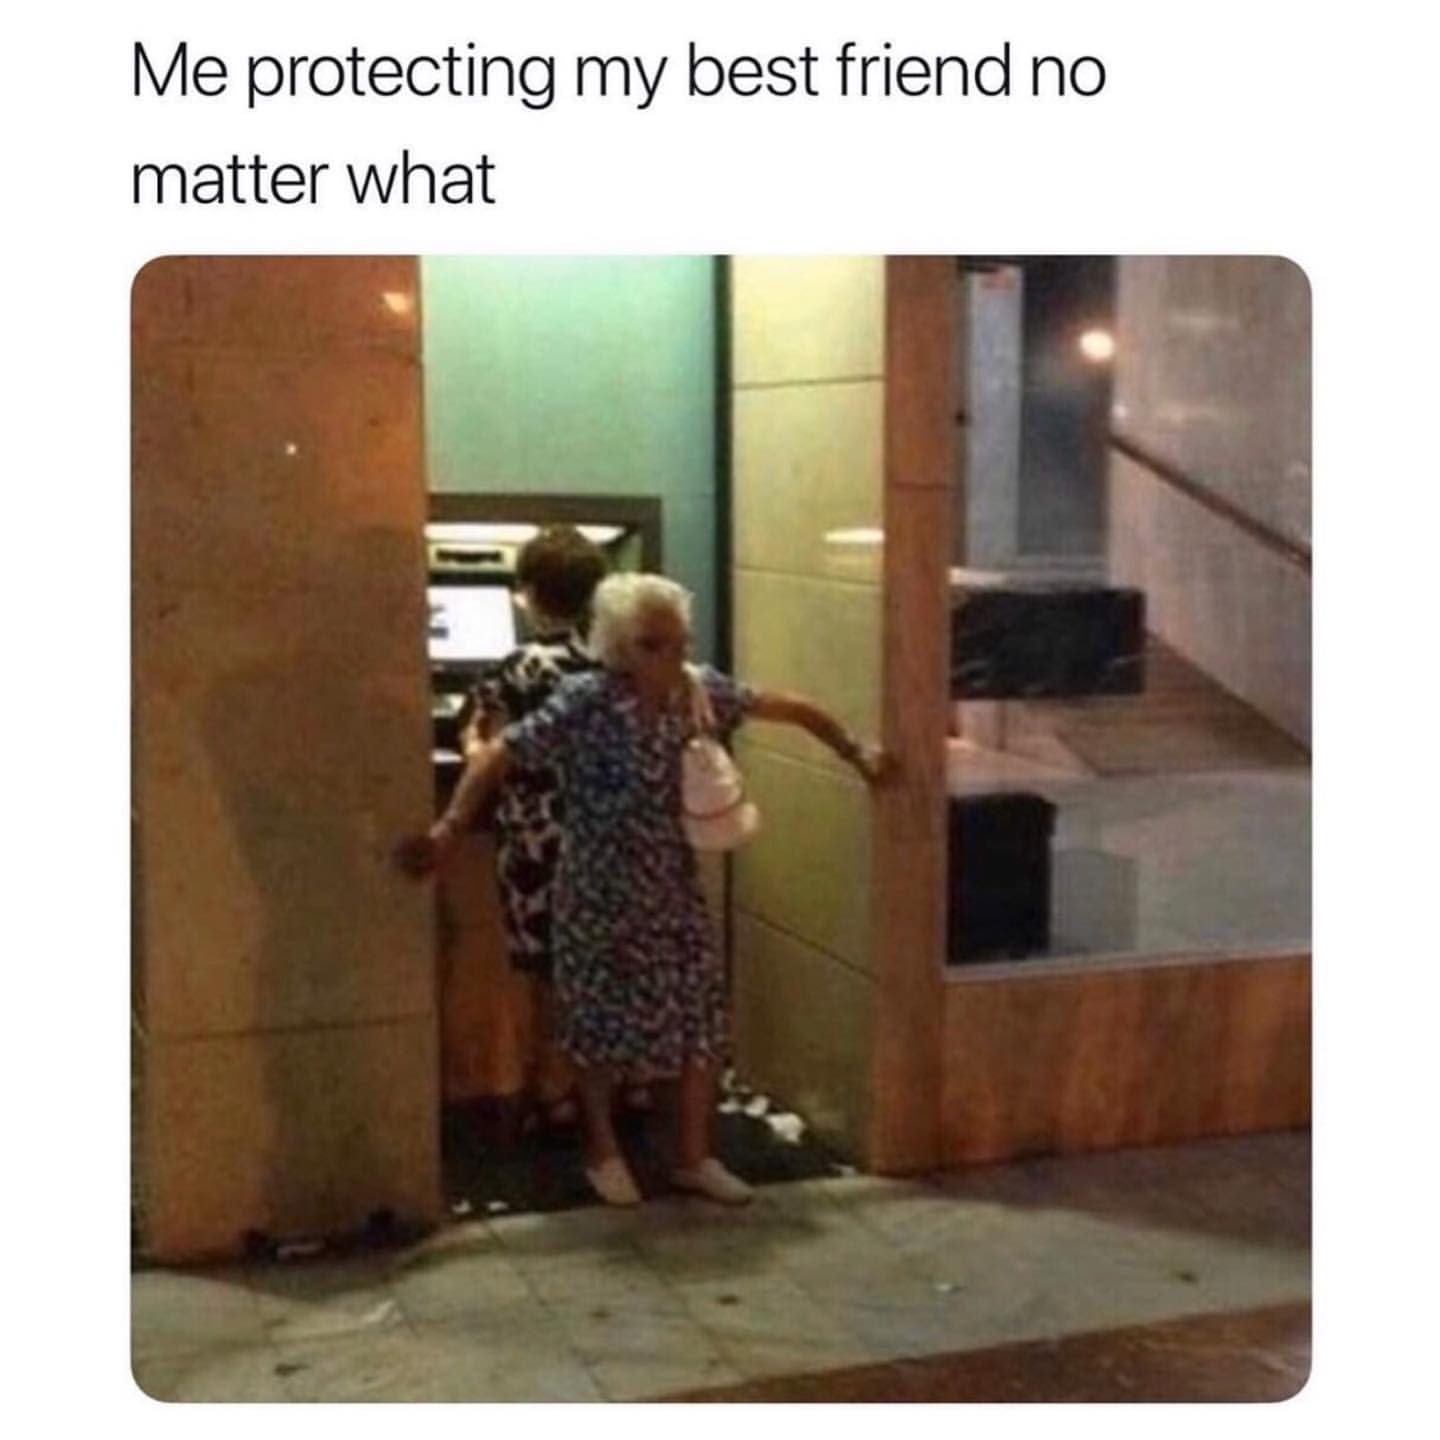 Me protecting my best friend no matter what.